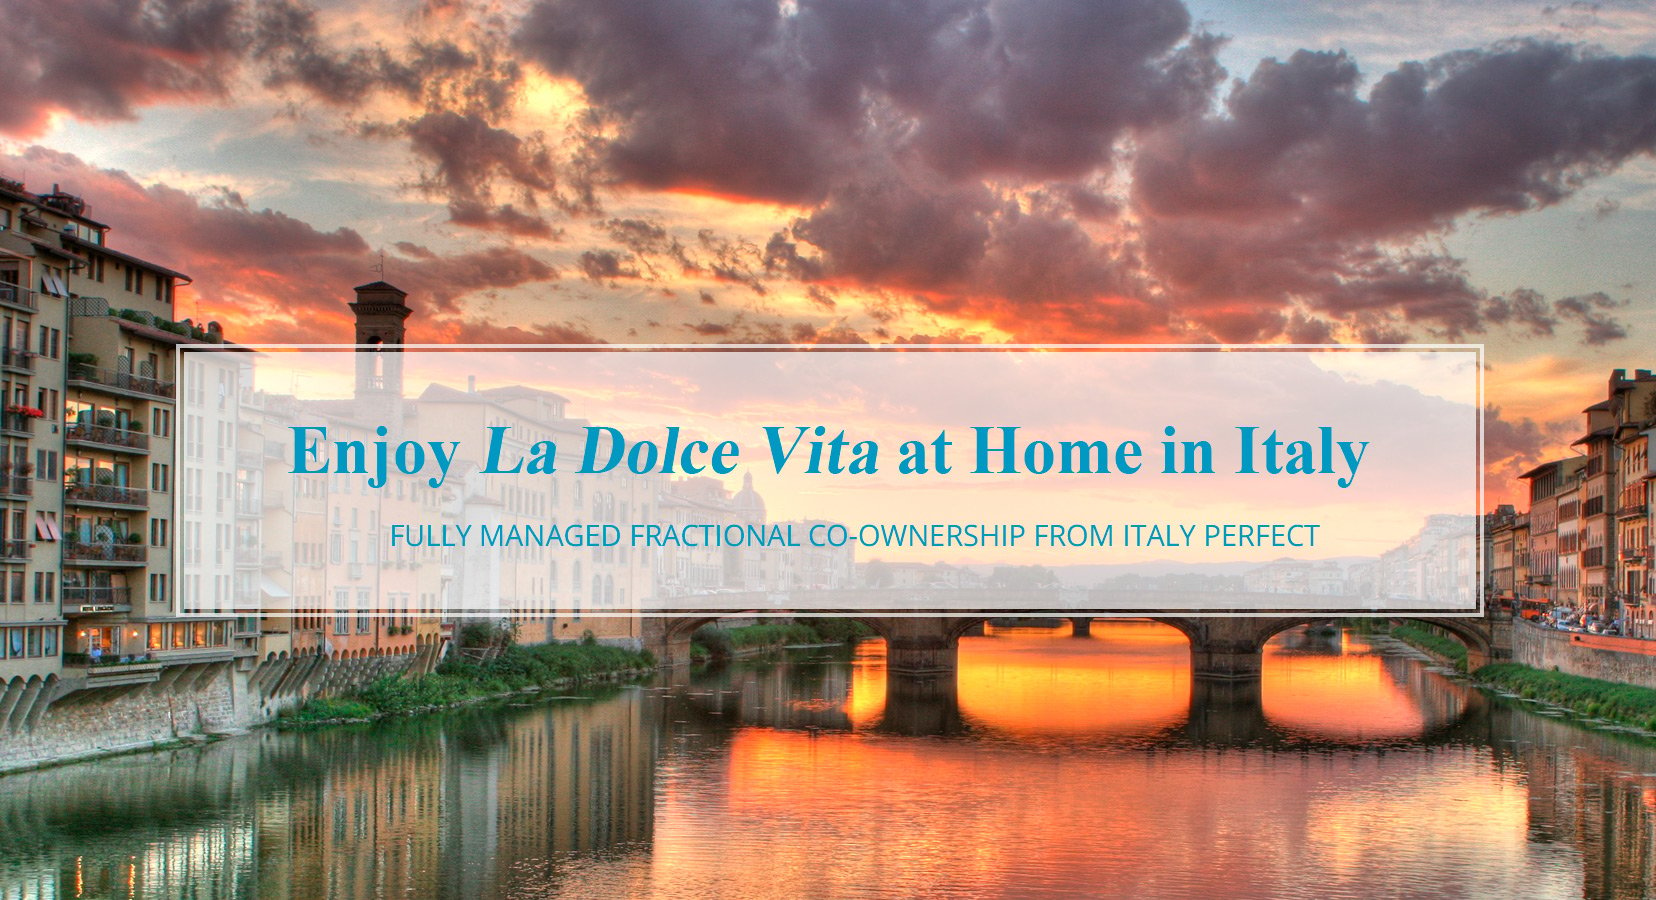 Italy Perfect Fractional Co-Ownership - Enjoy la dolce vita at home in Italy